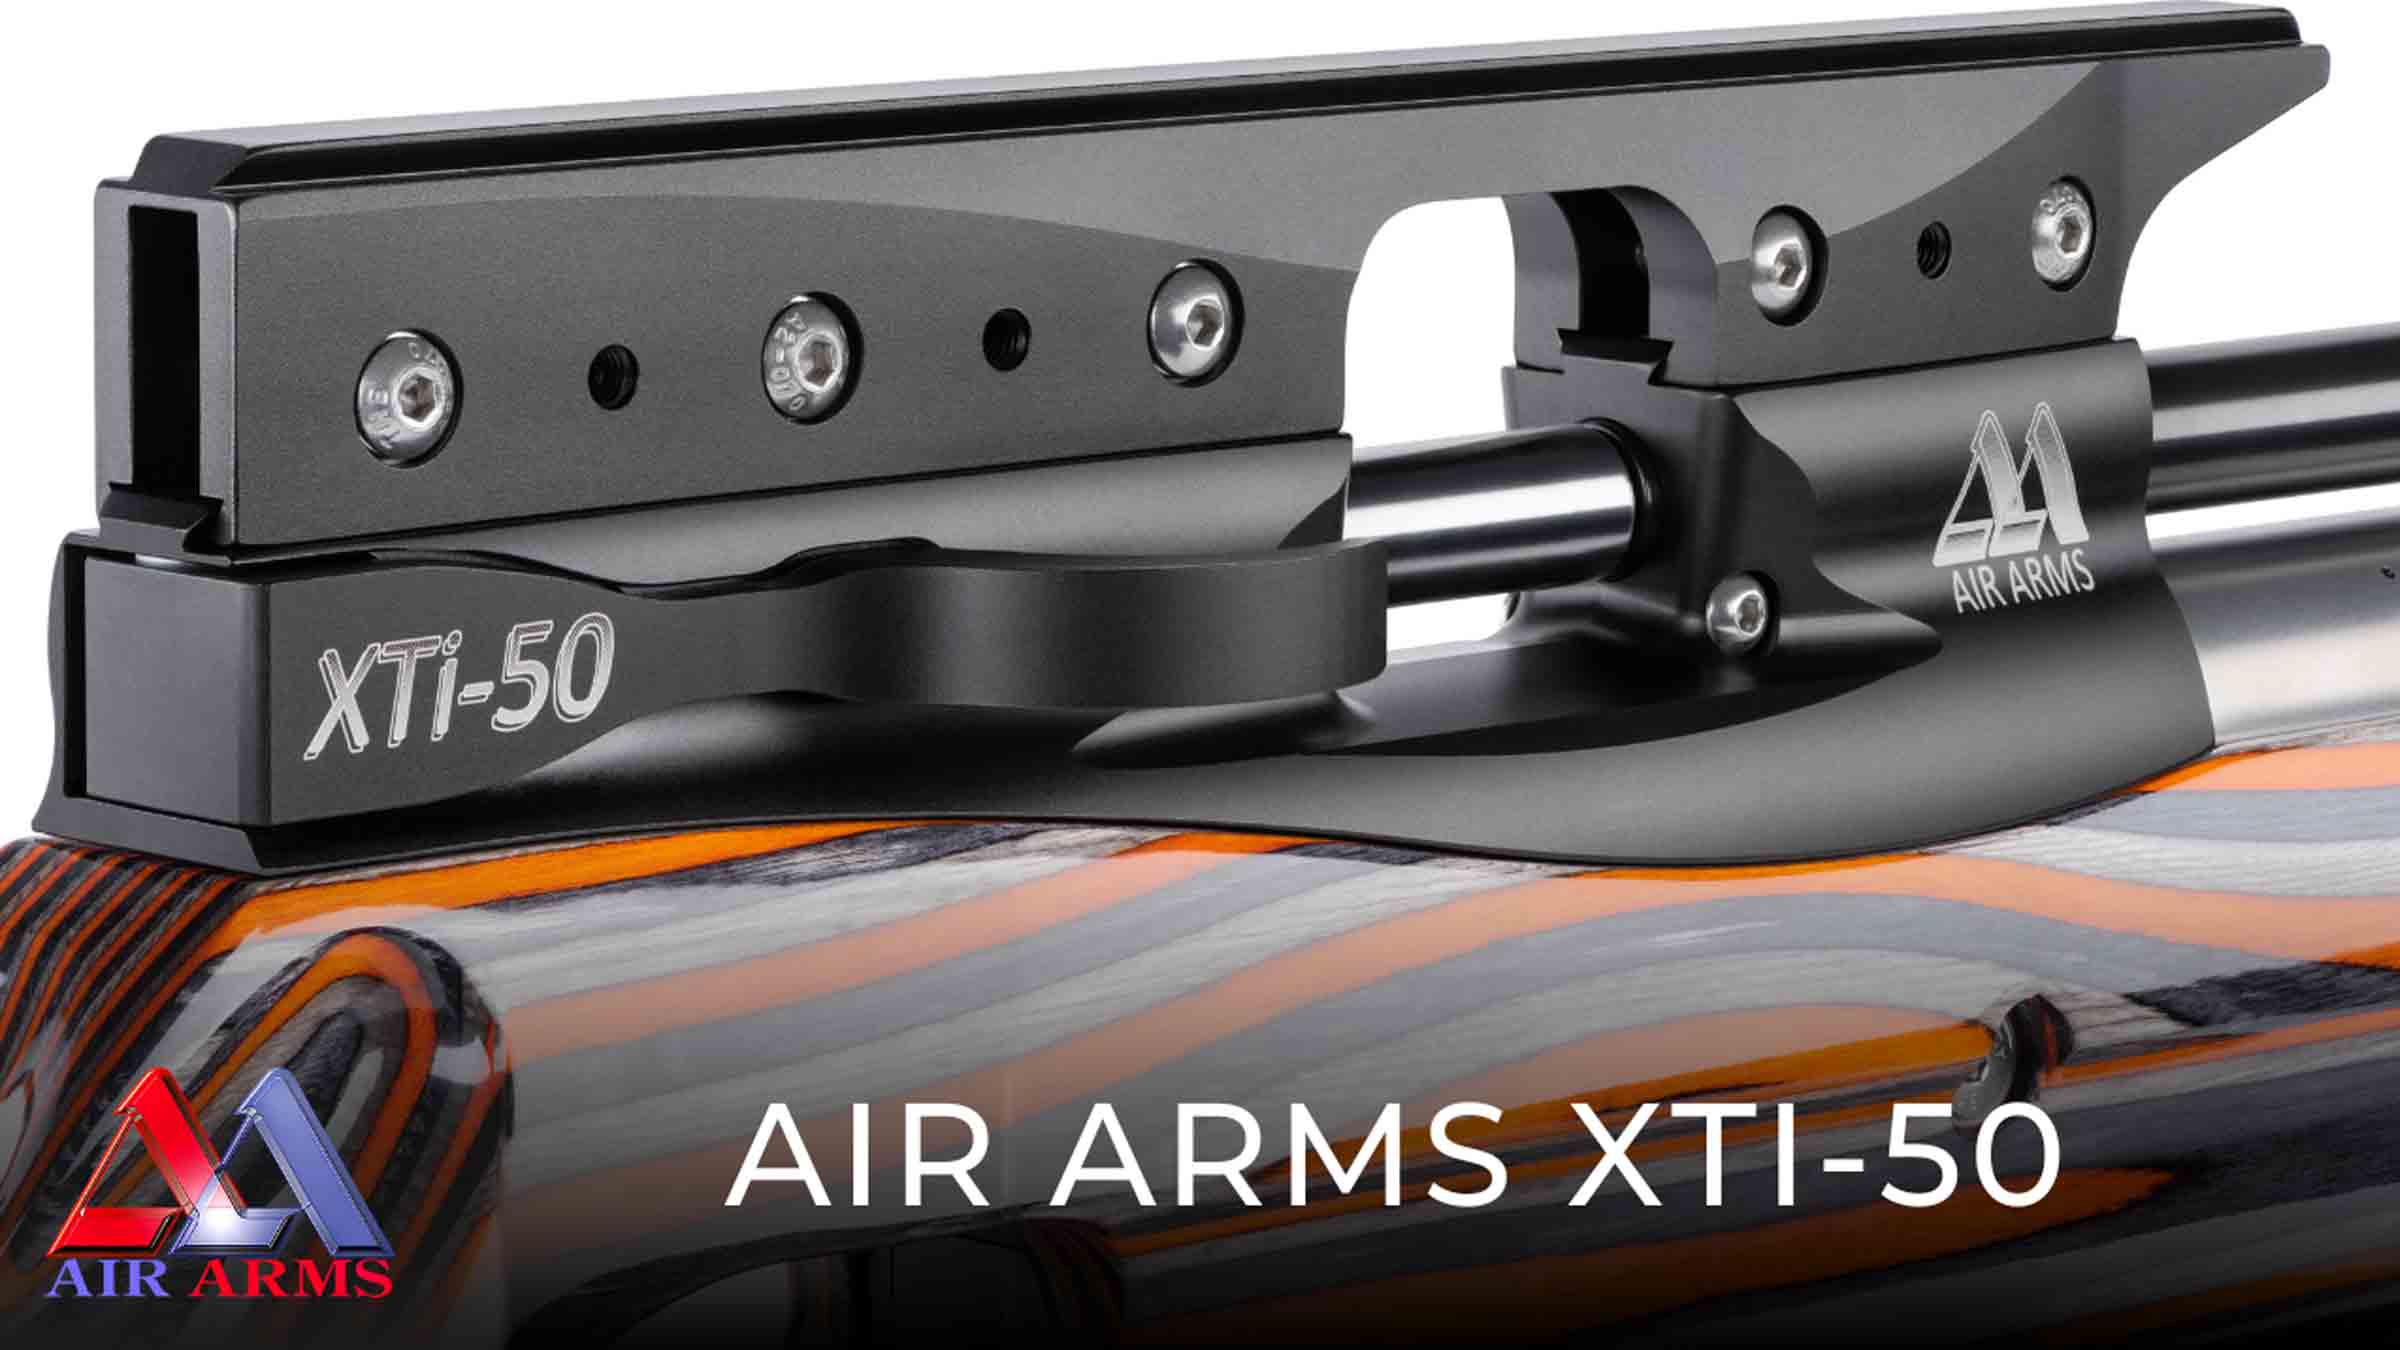 Introducing the Air arms XTi-50